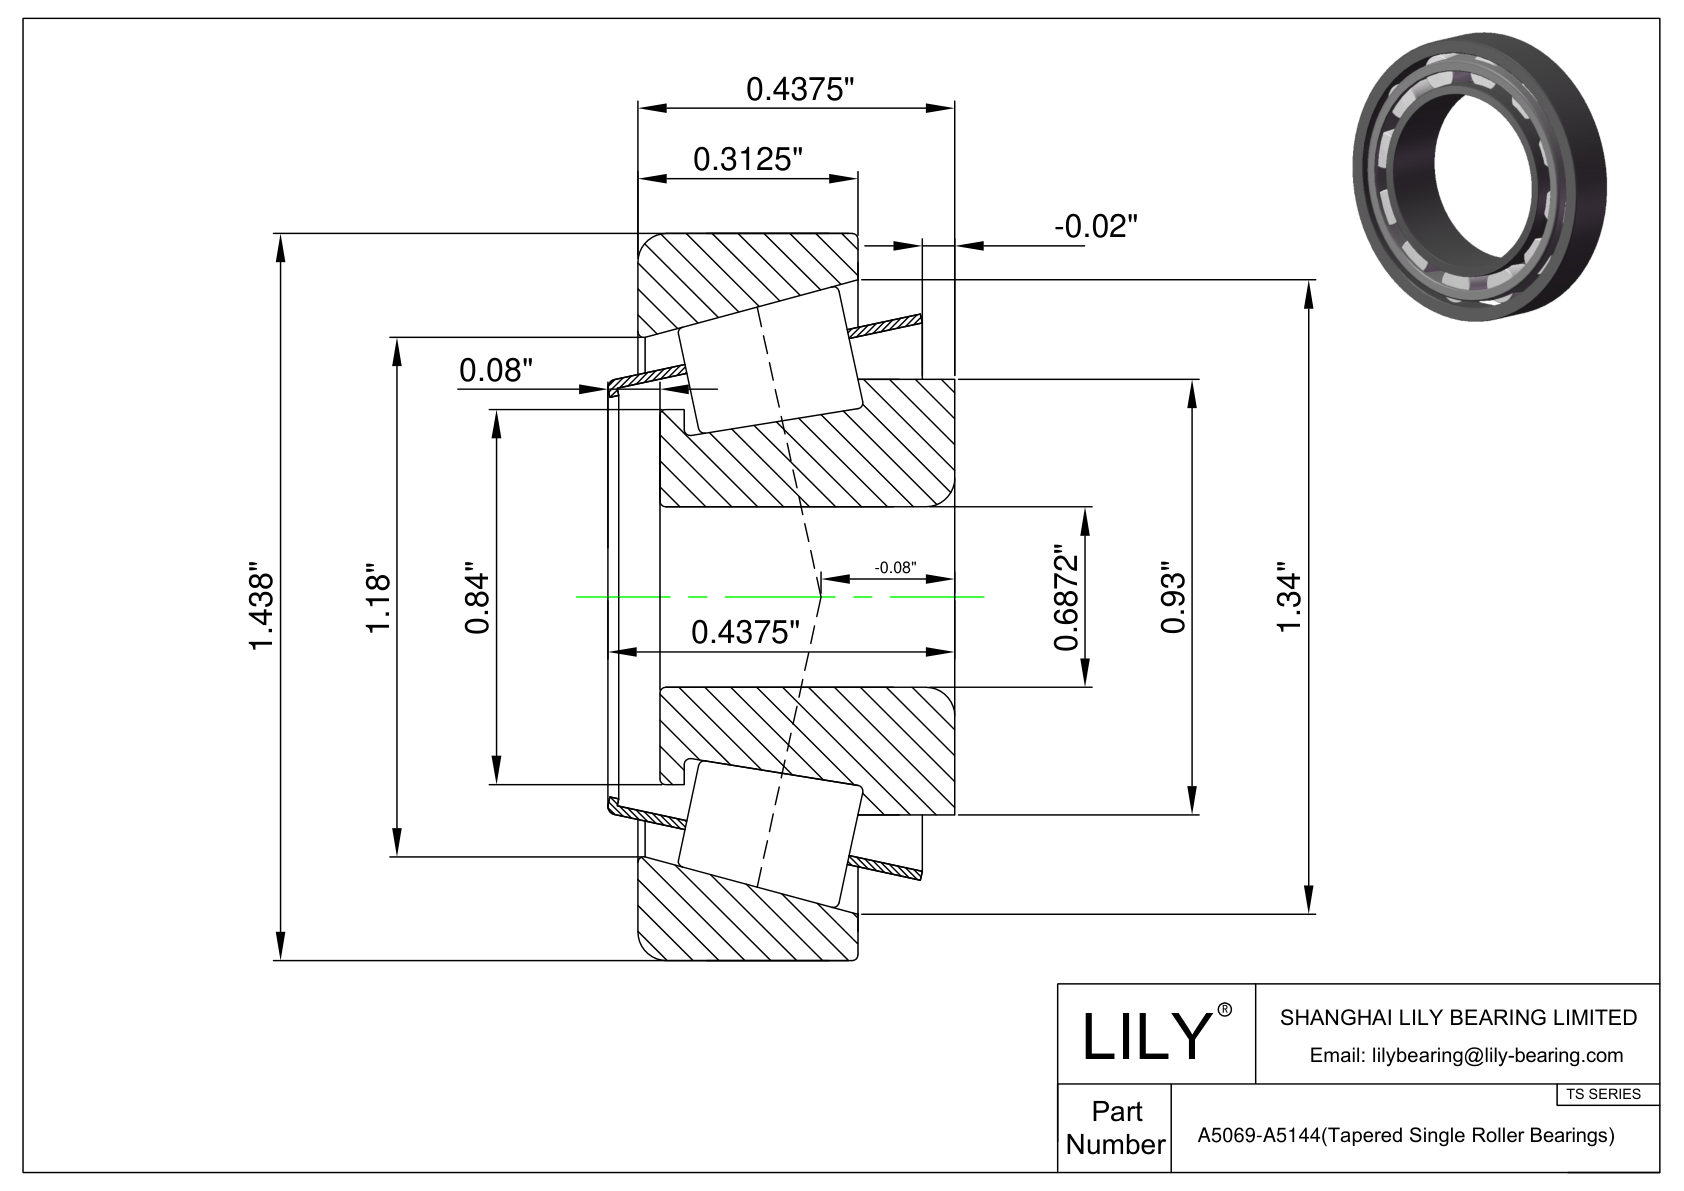 A5069-A5144 TS (Tapered Single Roller Bearings) (Imperial) cad drawing